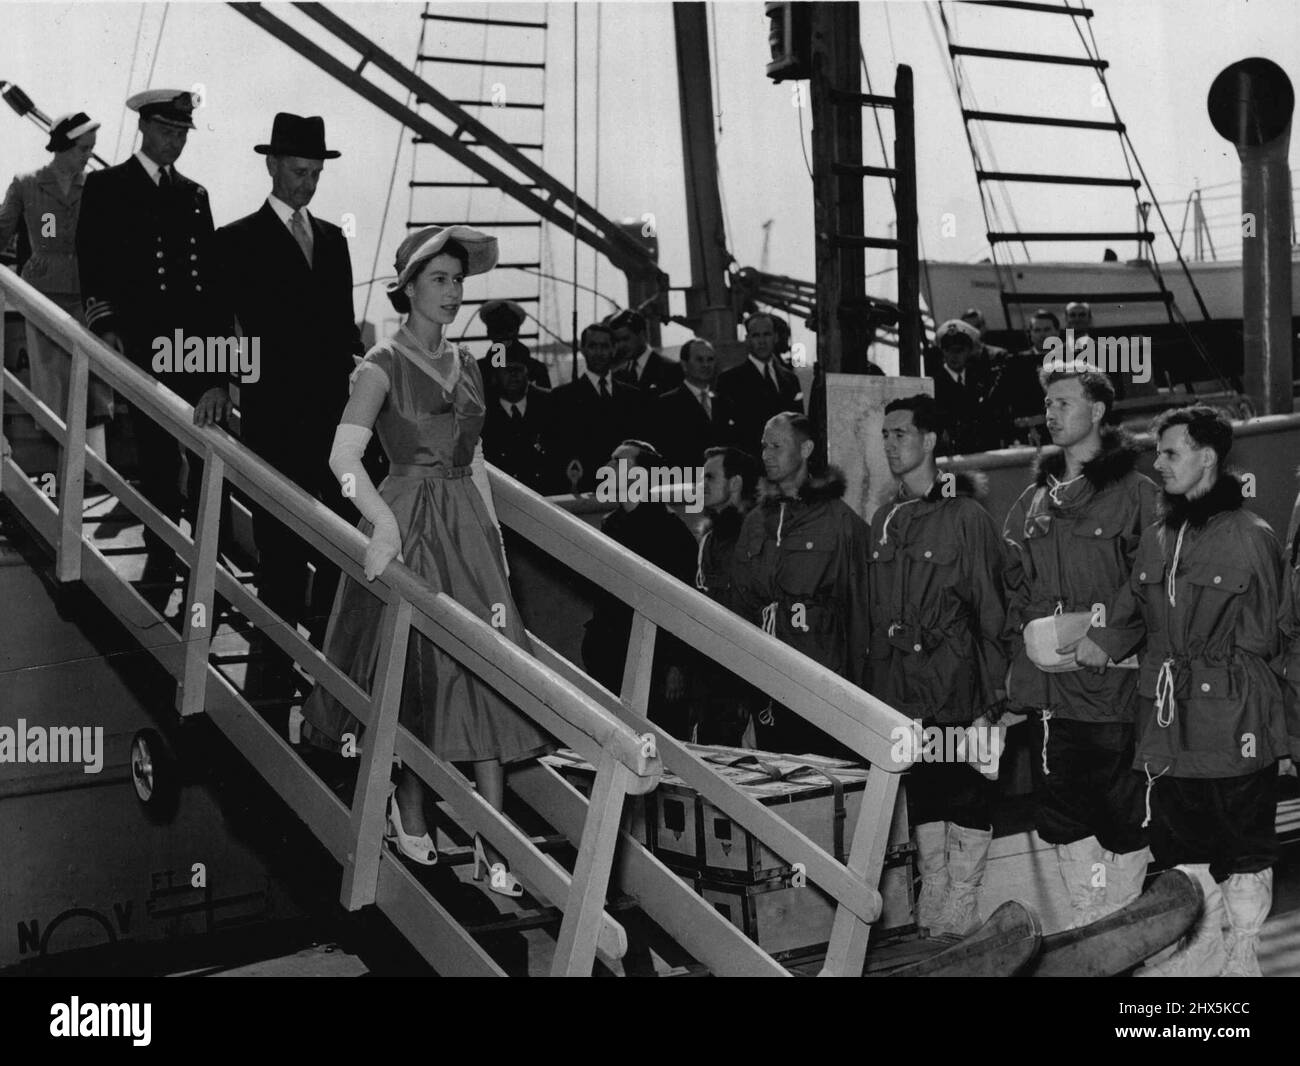 The Norwegian sealer Tottan, which has been chartered for British expedition to Greenland was inspected by H.M. The Queen at Tower Pier yesterday. The Queen inspects the men on the Tottan. They all wore Middle-Parka jackets over a combat suit with Mukluk boots. July 02, 1952. (Photo by Daily Mirror). Stock Photo